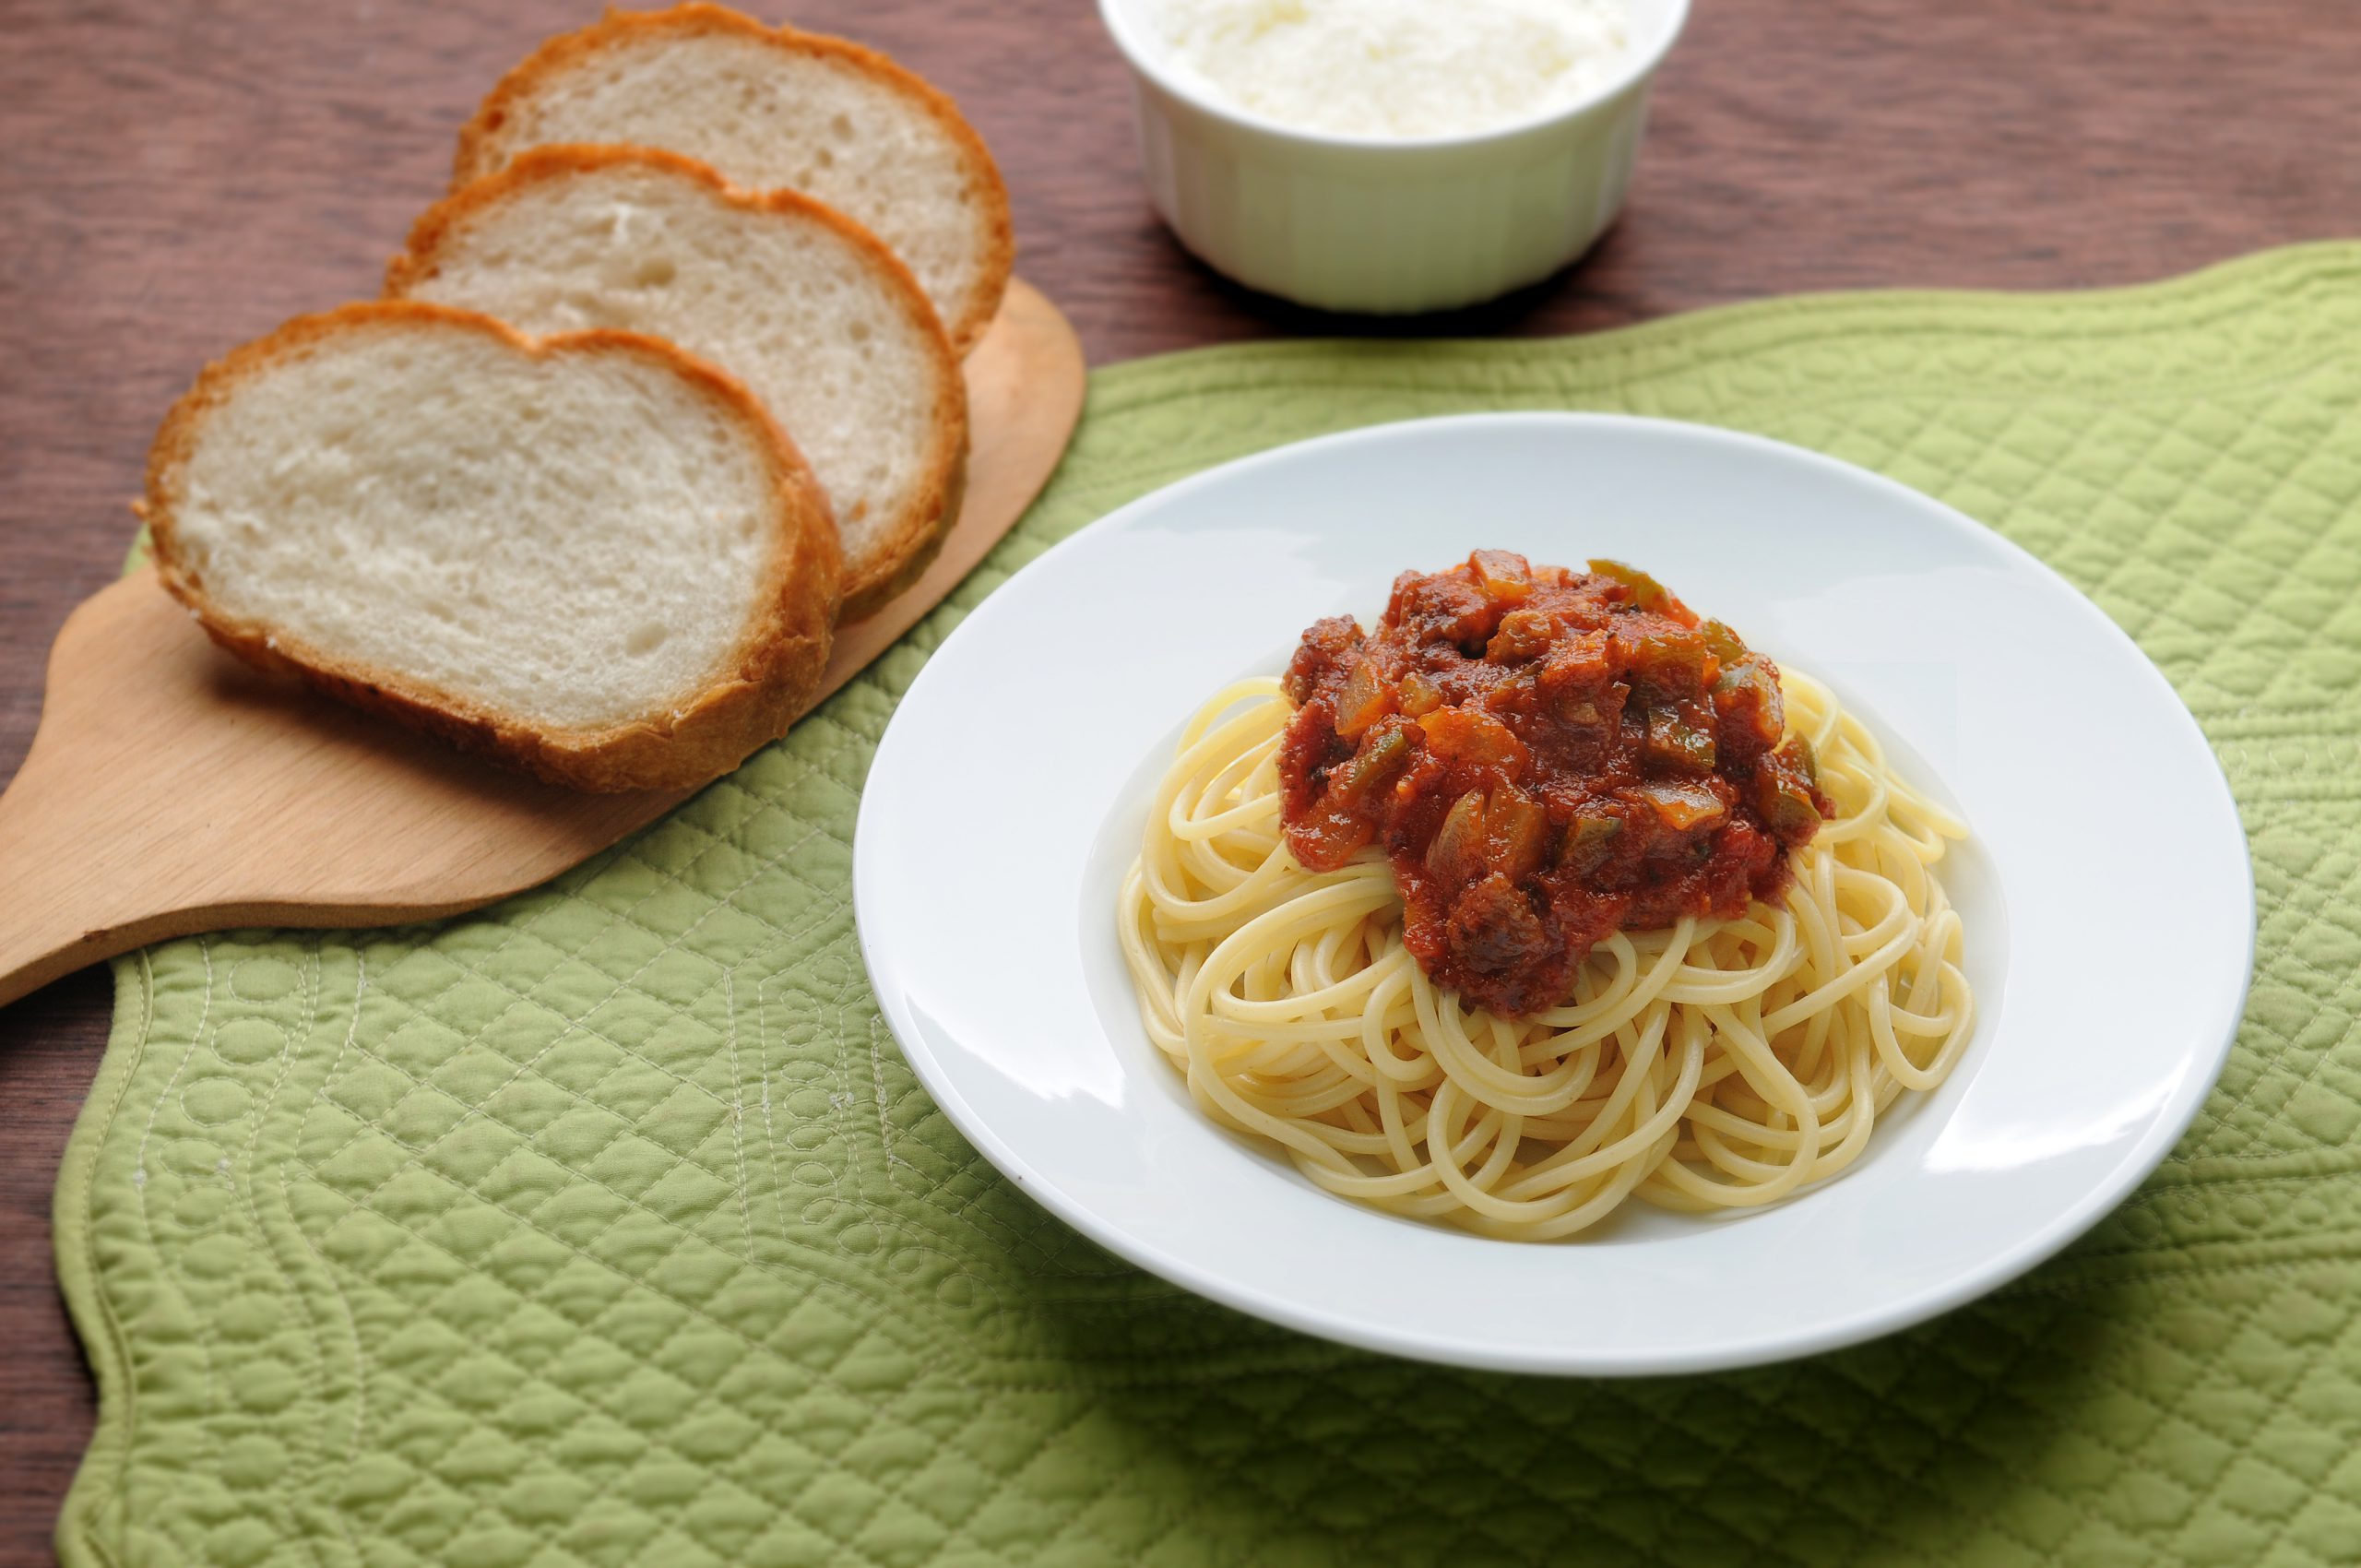 Spaghetti with Italian red sauce with onions and bell peppers and a side of bread